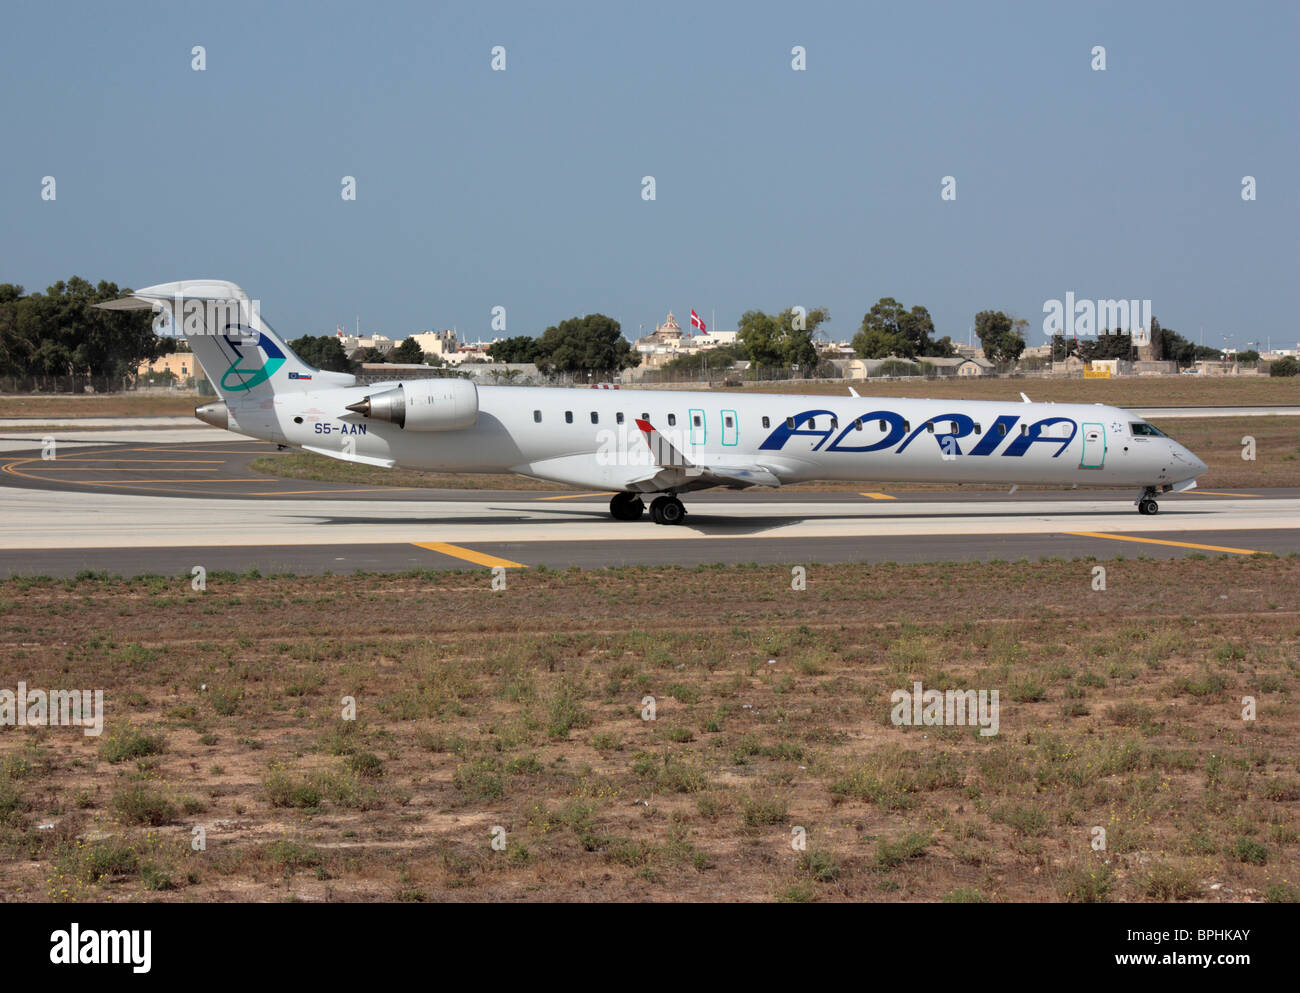 Commercial aviation. Adria Airways Bombardier CRJ900 regional airliner on arrival in Malta Stock Photo